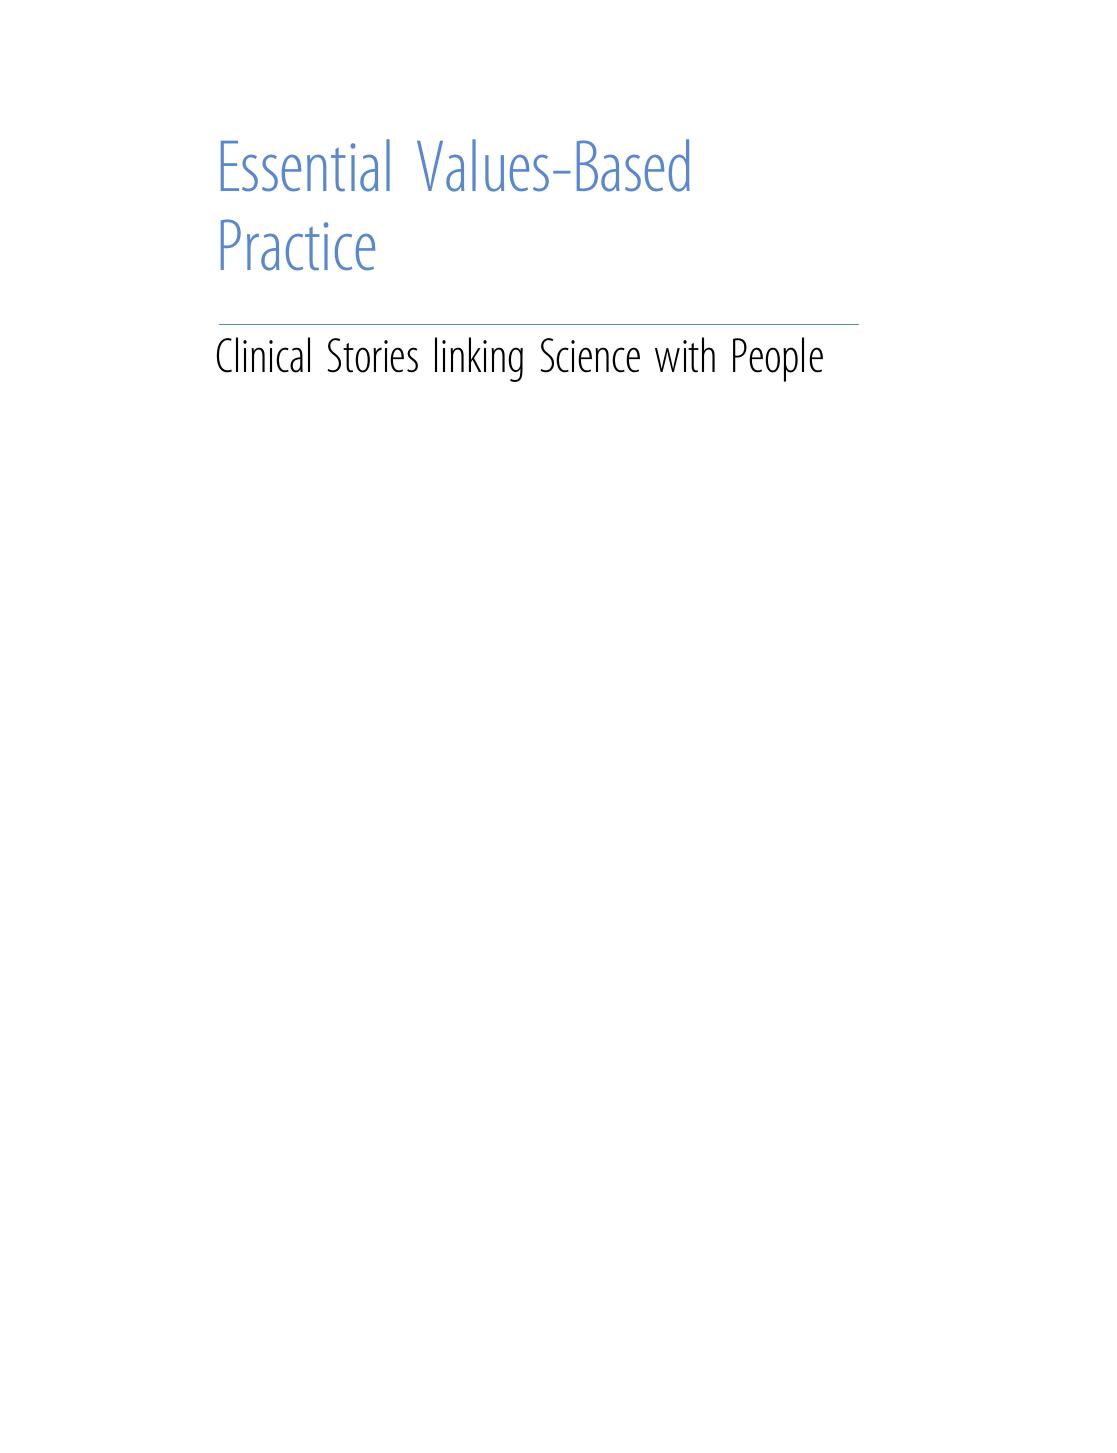 Essential Values-Based Practice- Clinical Stories Linking Science with People.jpg